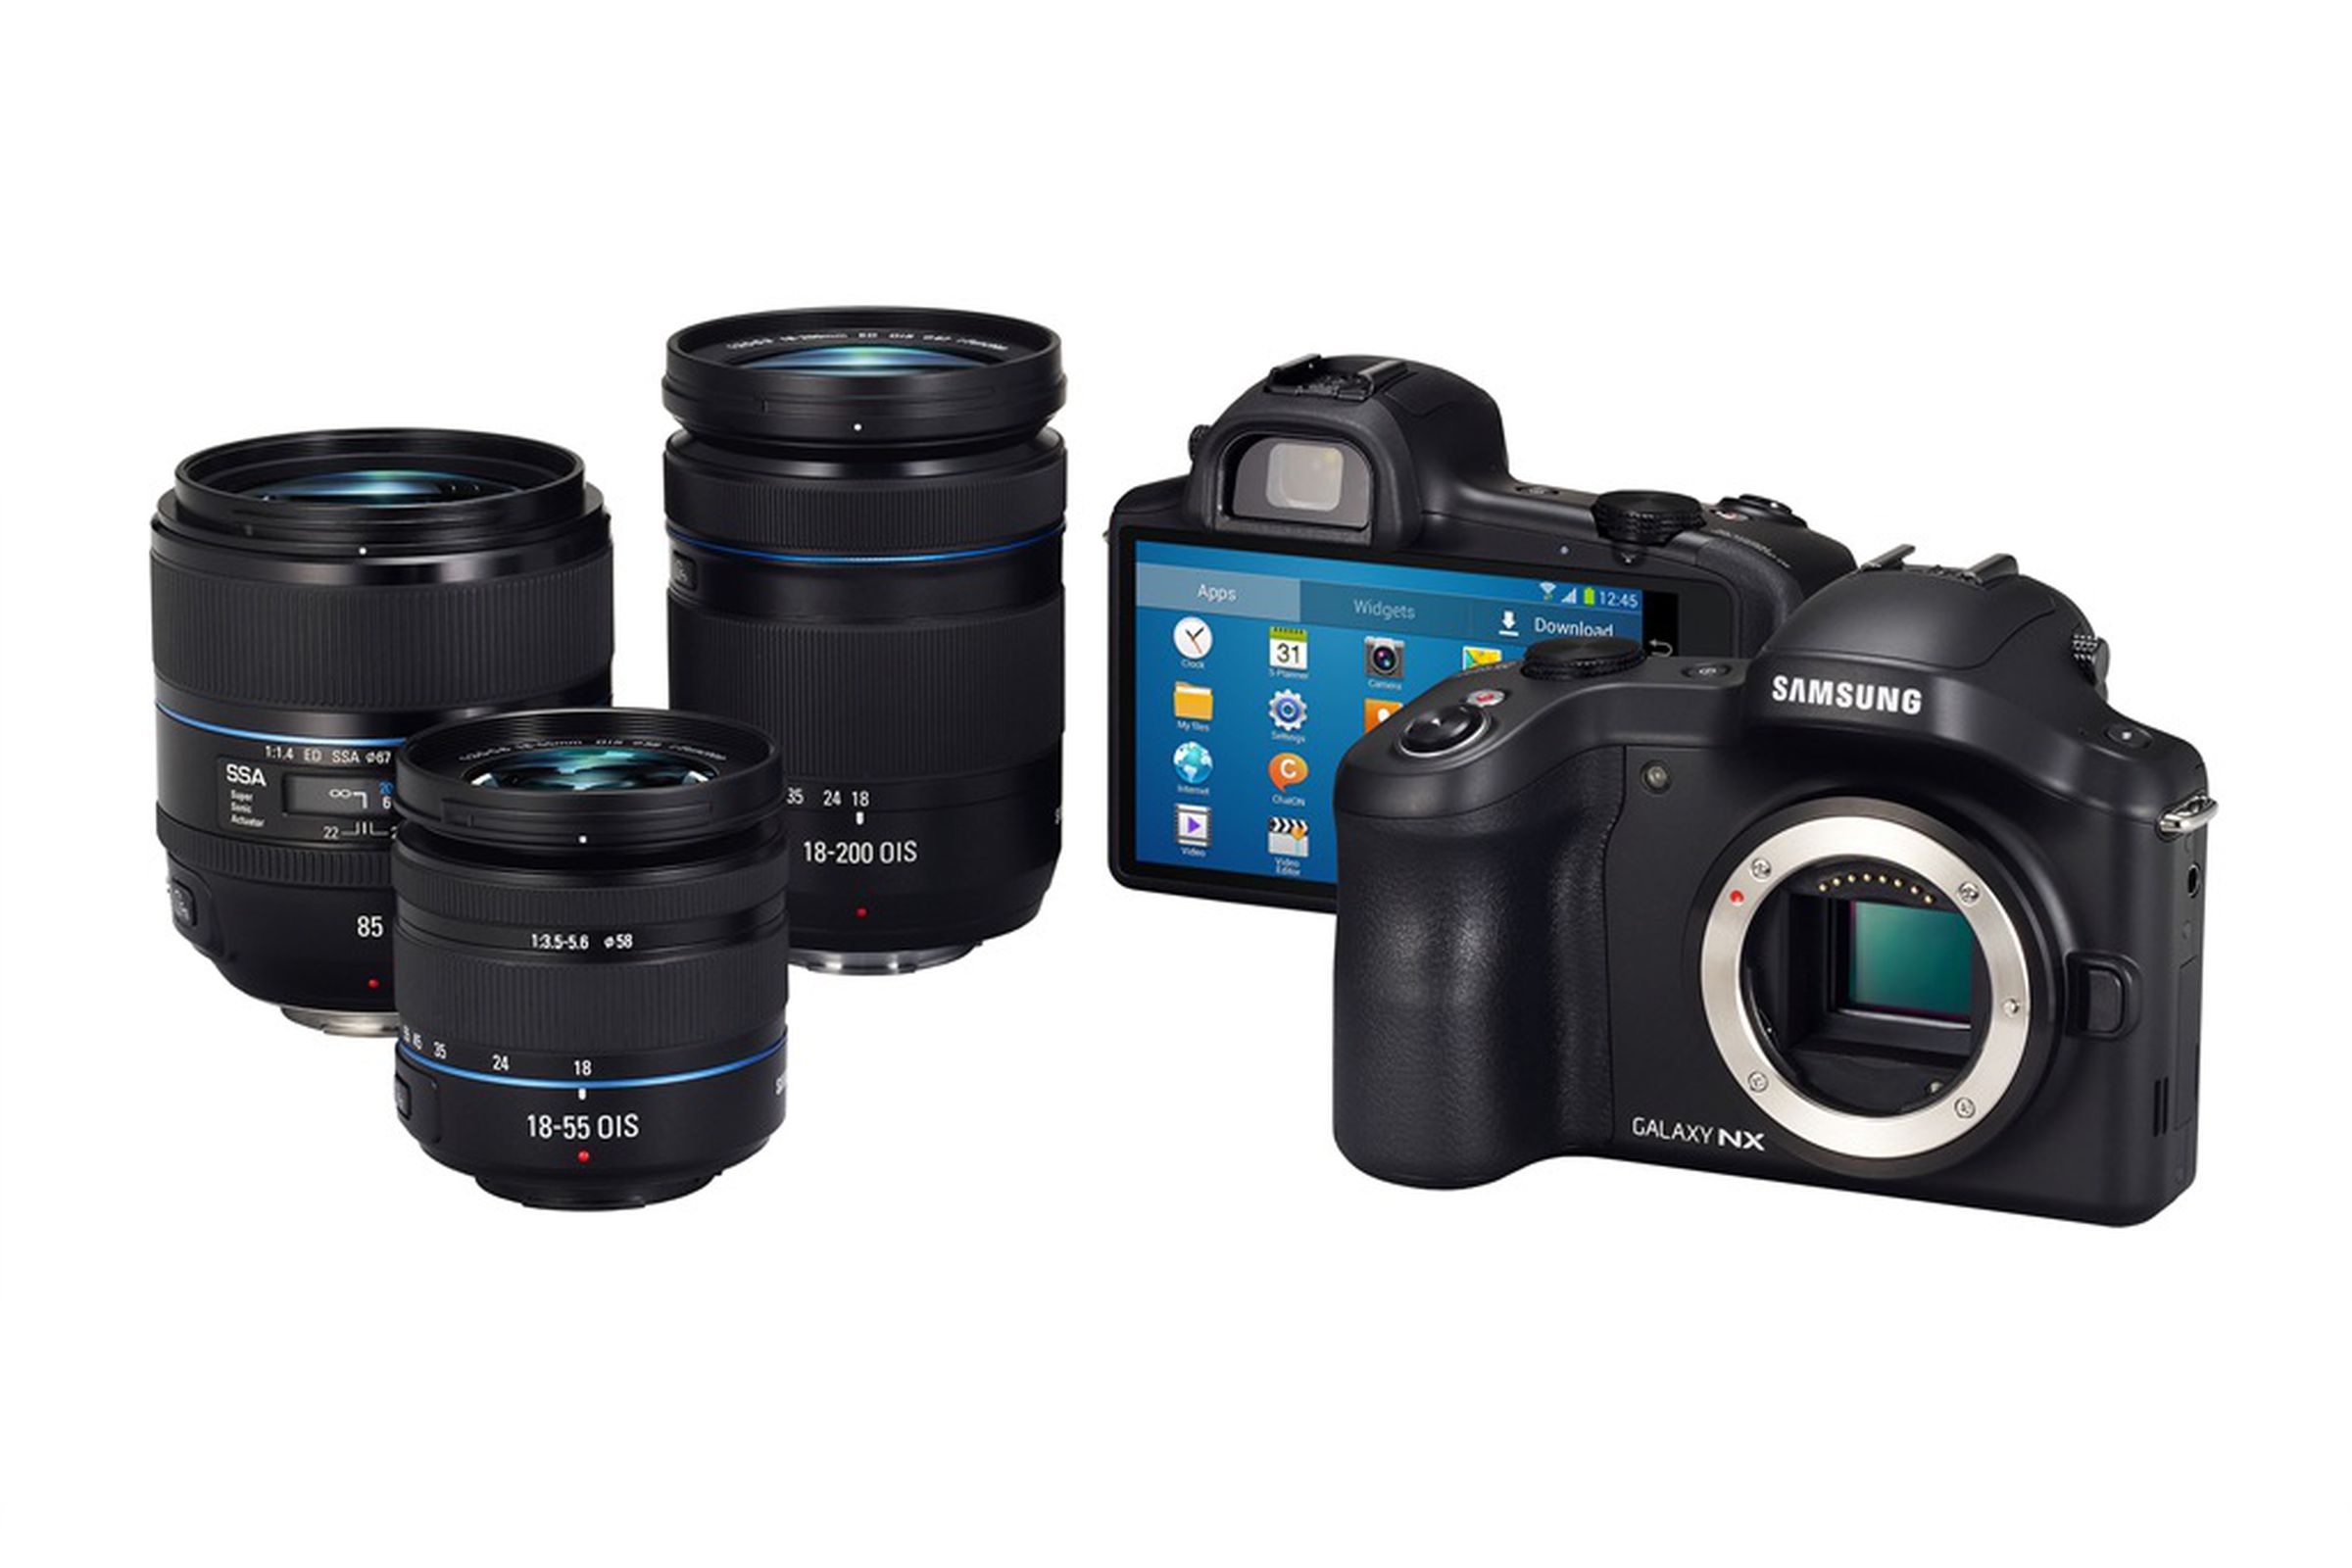 Gallery Photo: Samsung Galaxy NX pictures